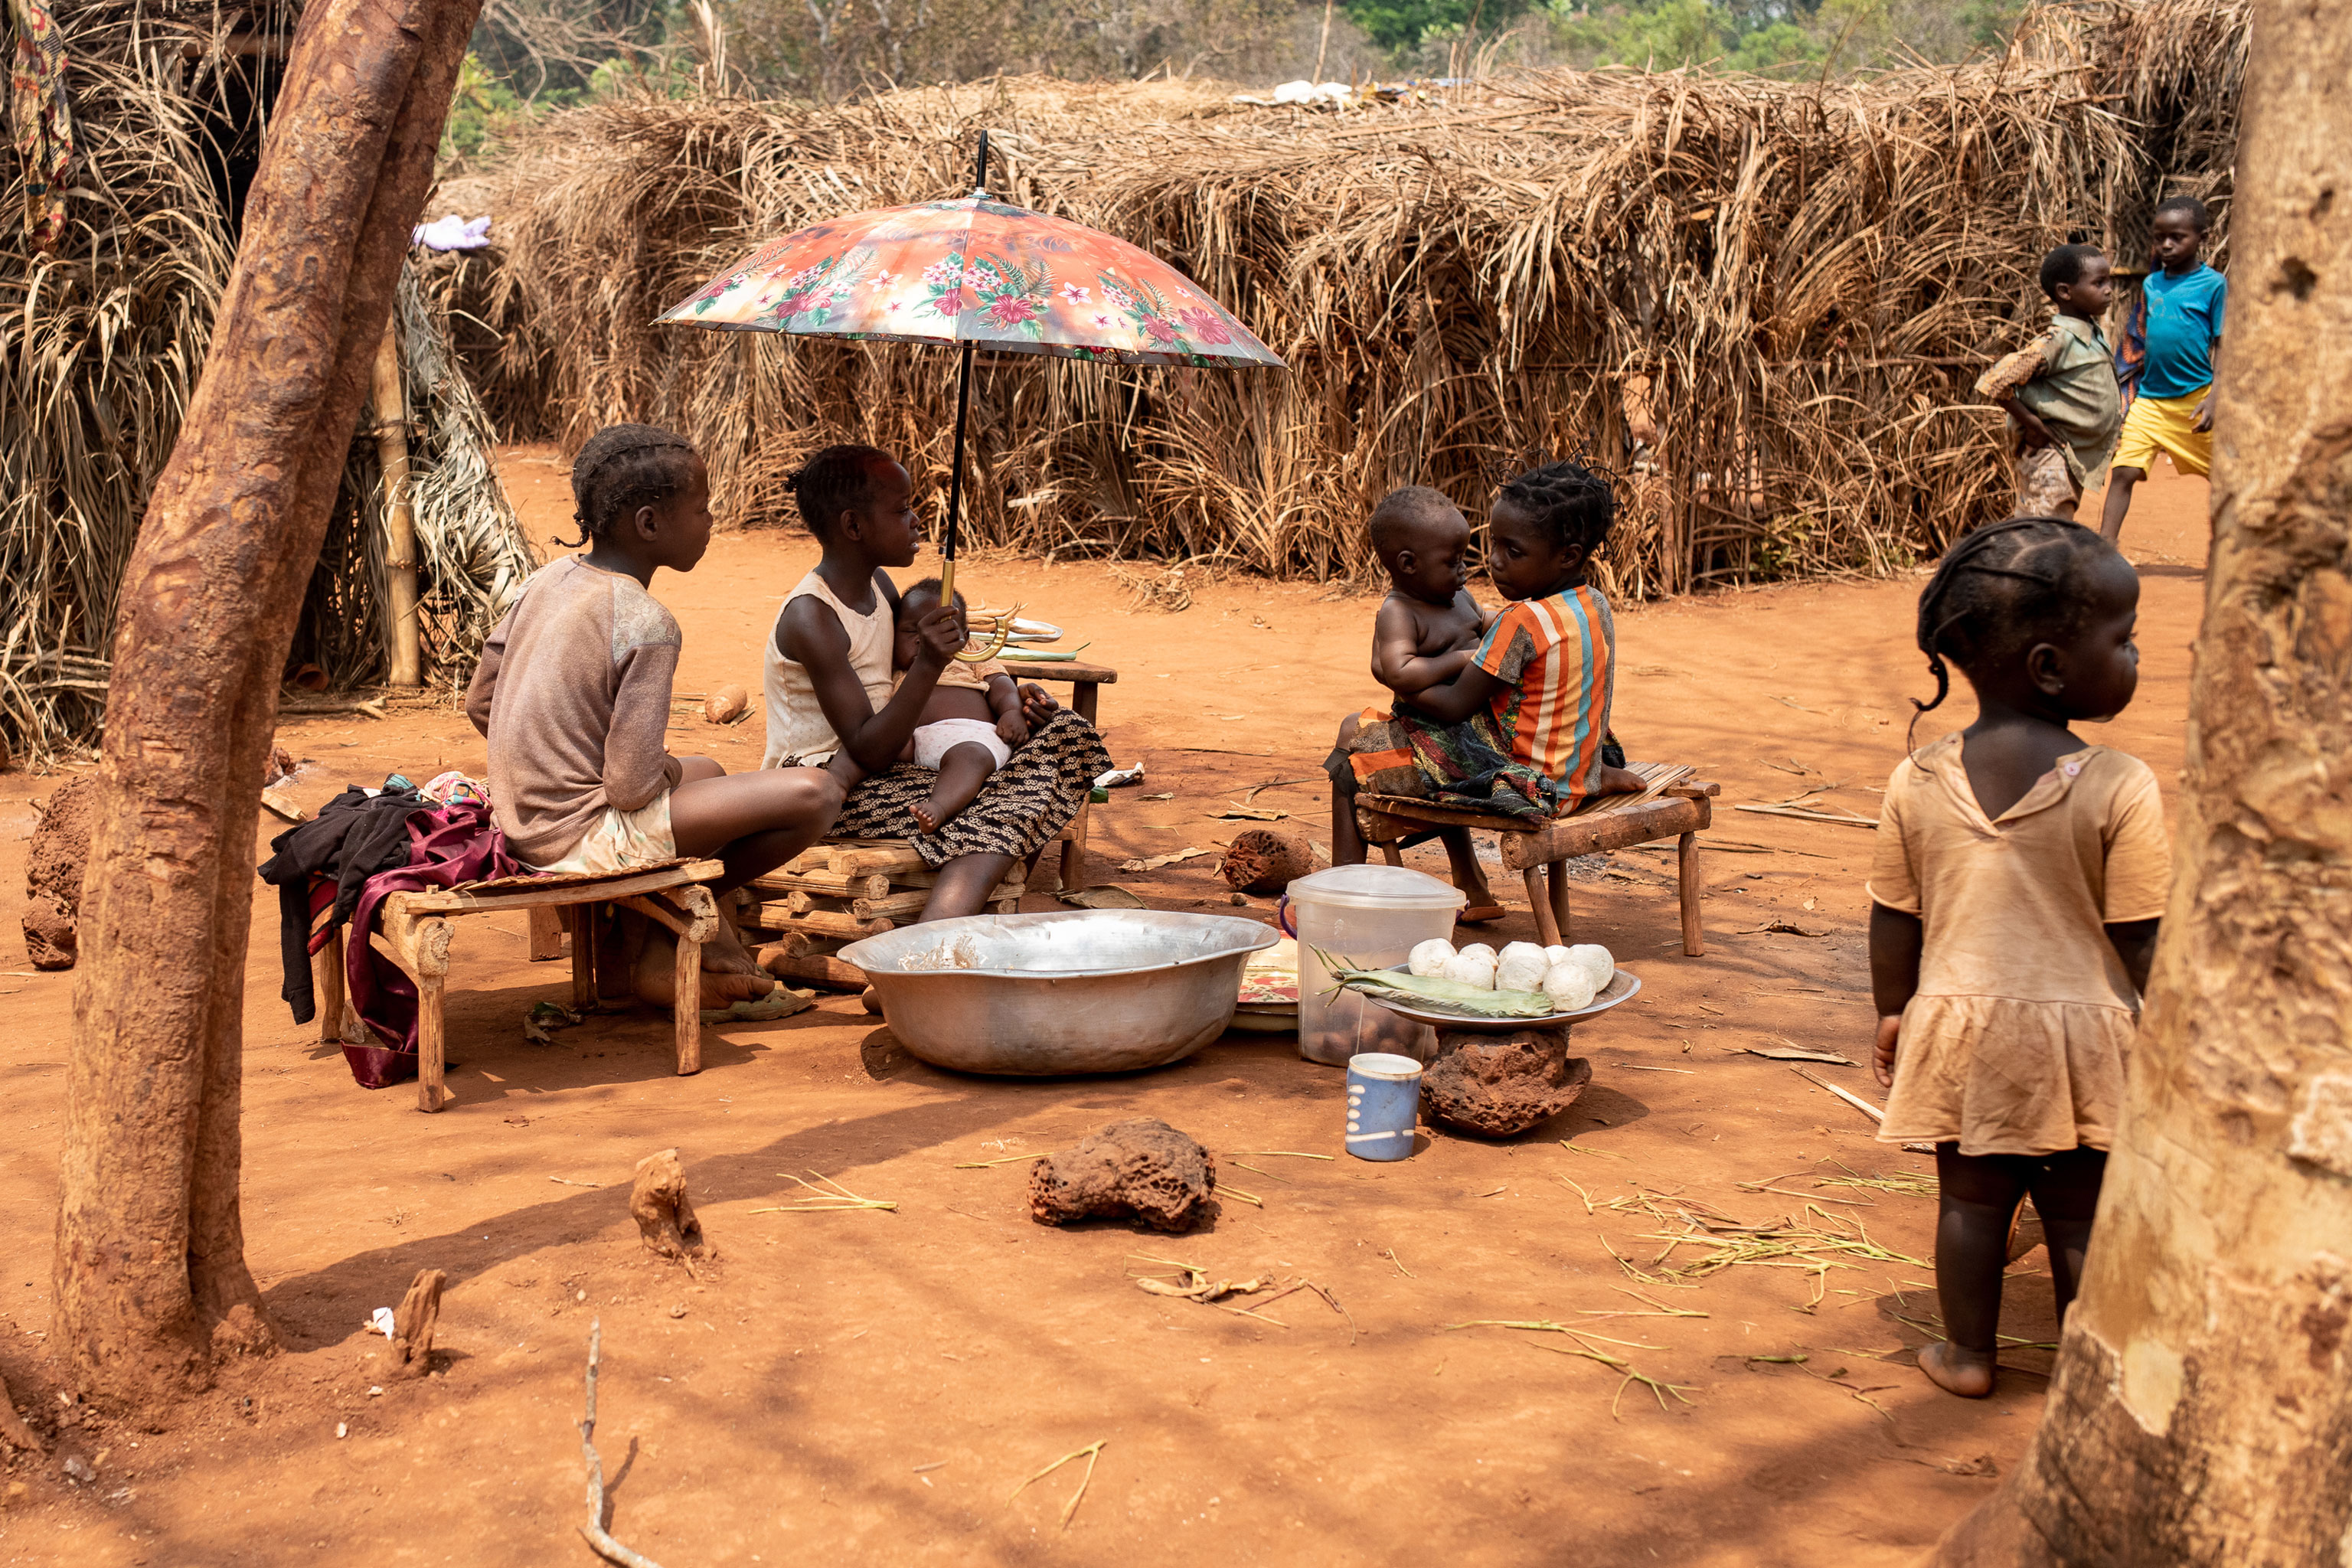 young children sitting in an arid area with small food for sale